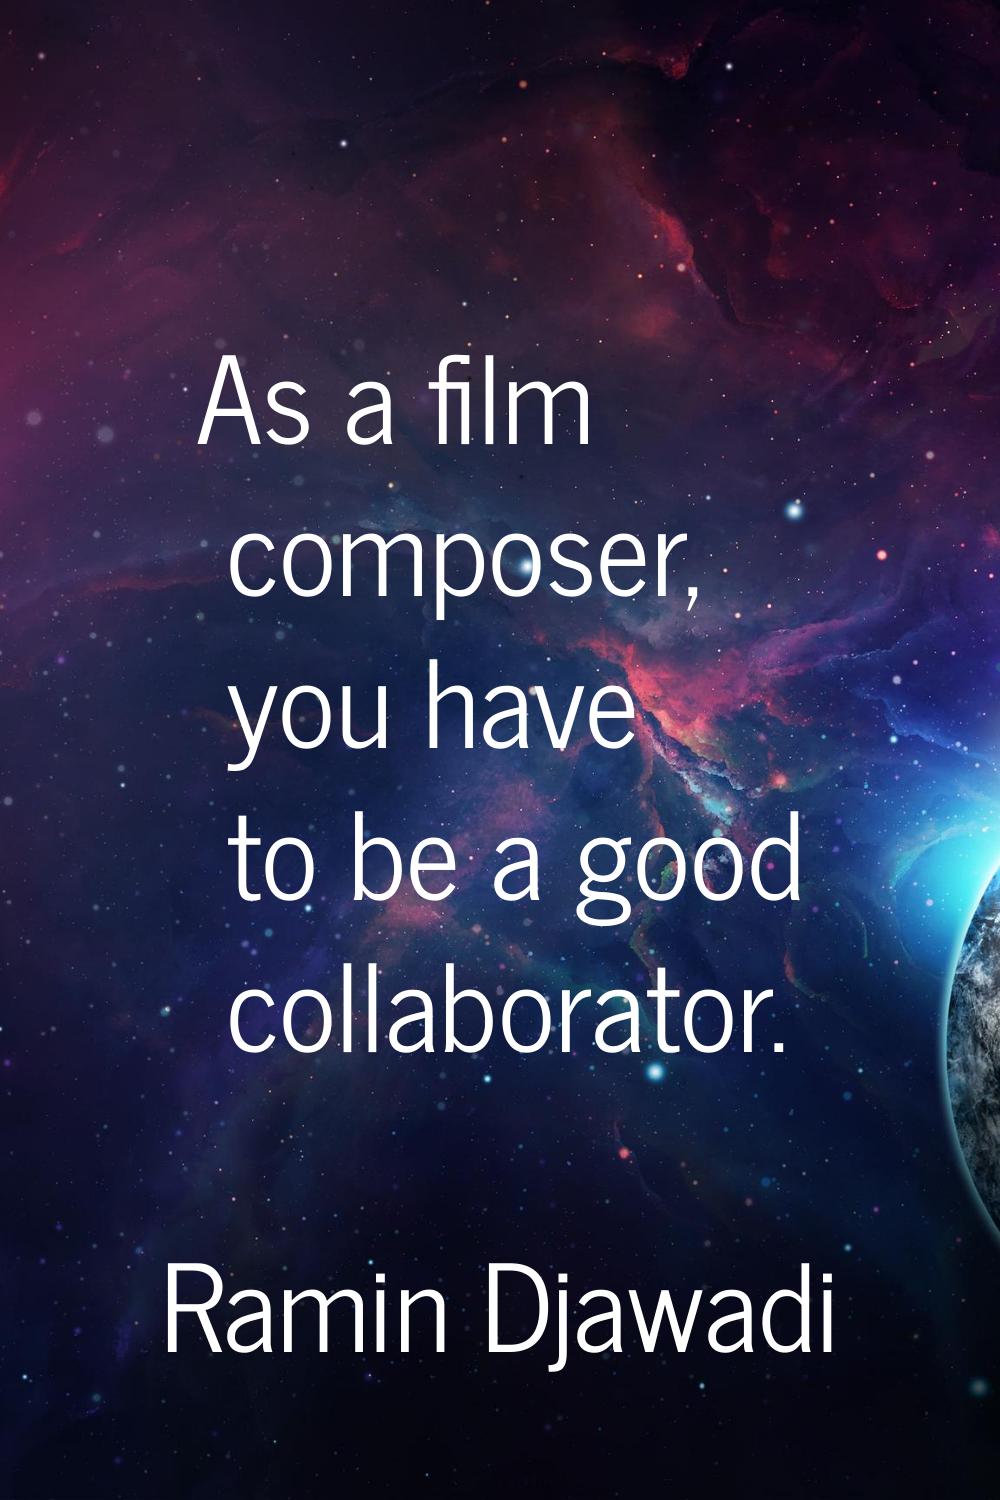 As a film composer, you have to be a good collaborator.